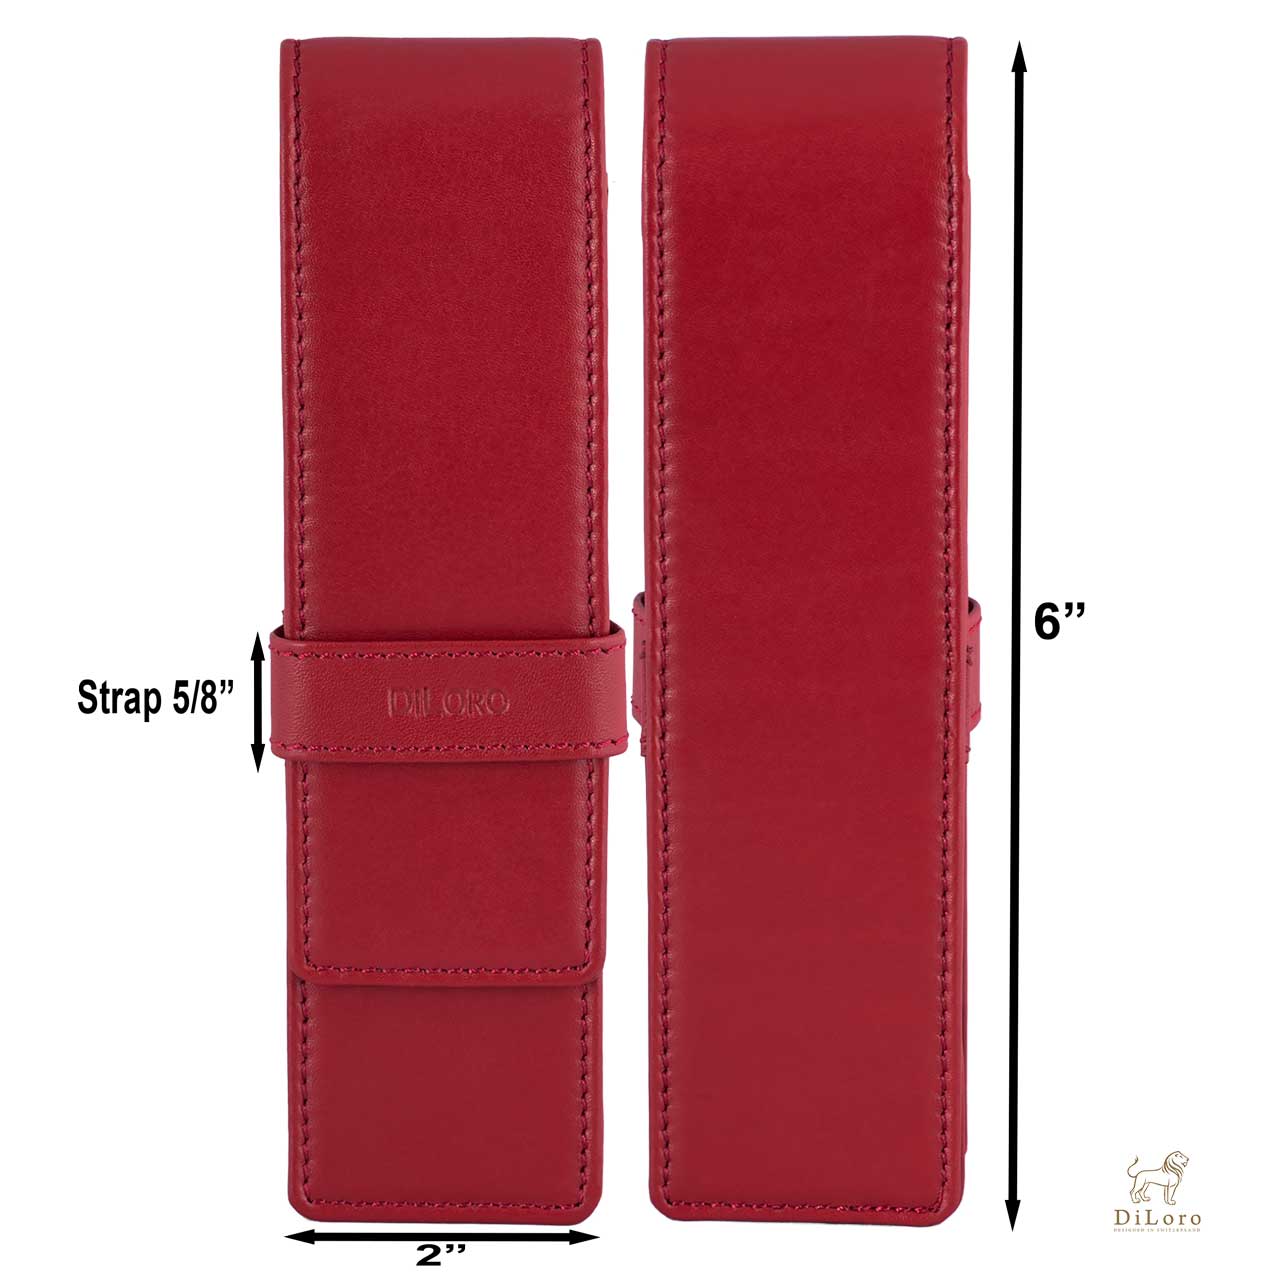 DiLoro Double Pen Case Holder in Top Quality, Venetian Red, Full Grain Nappa Leather - Front and Back View with Dimensions